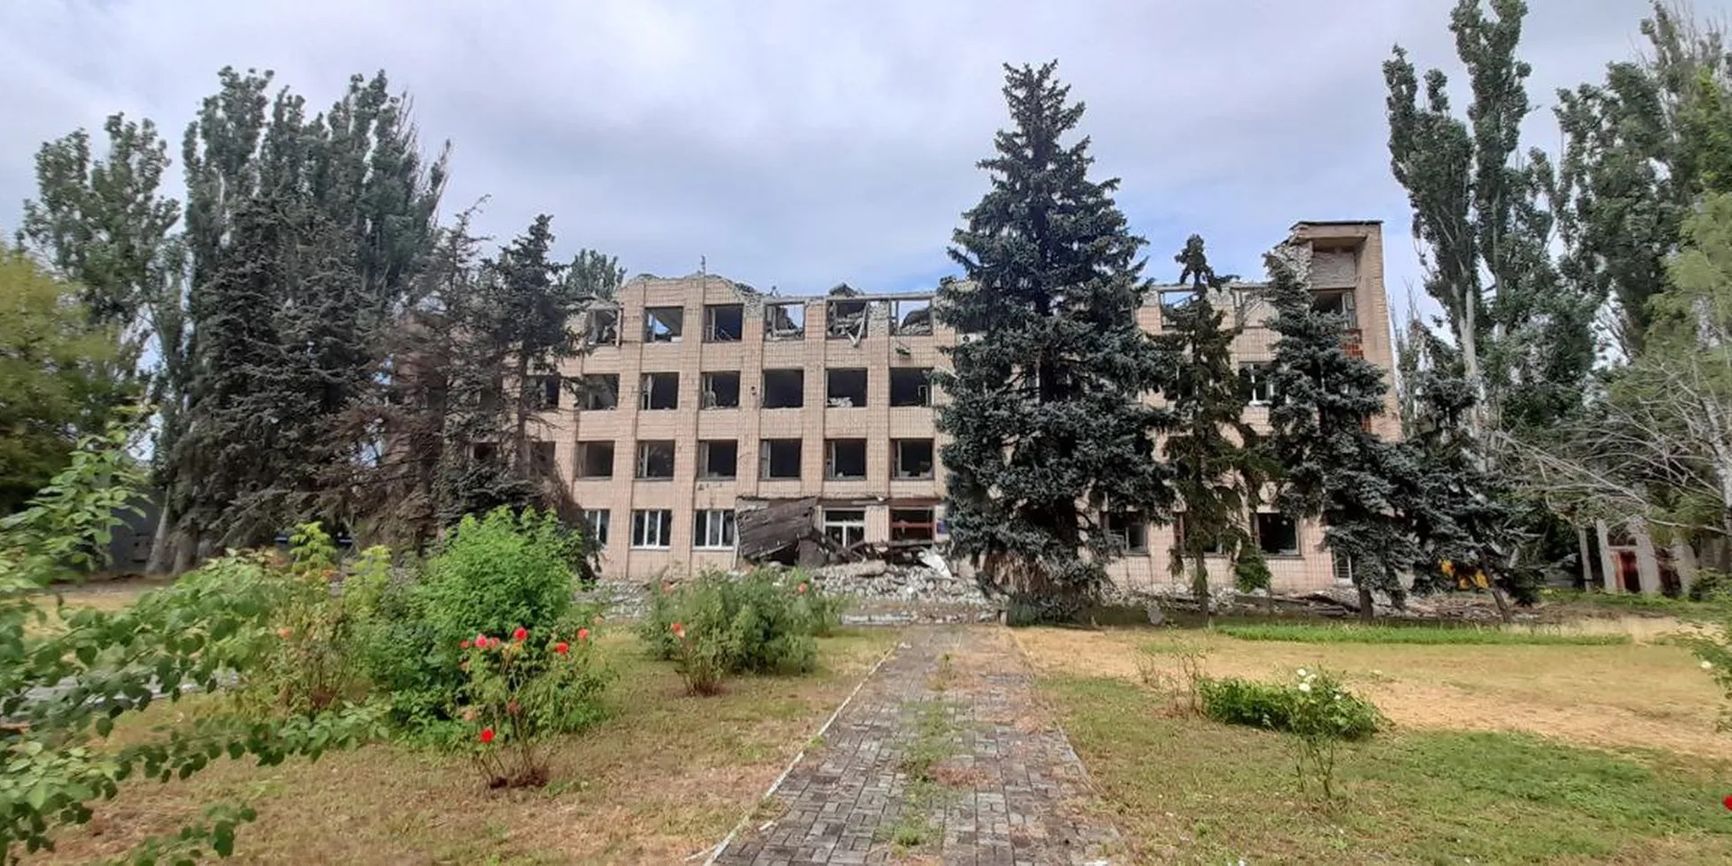 The destroyed and booby-trapped State Archive building in Vysokopillia, Kherson Region